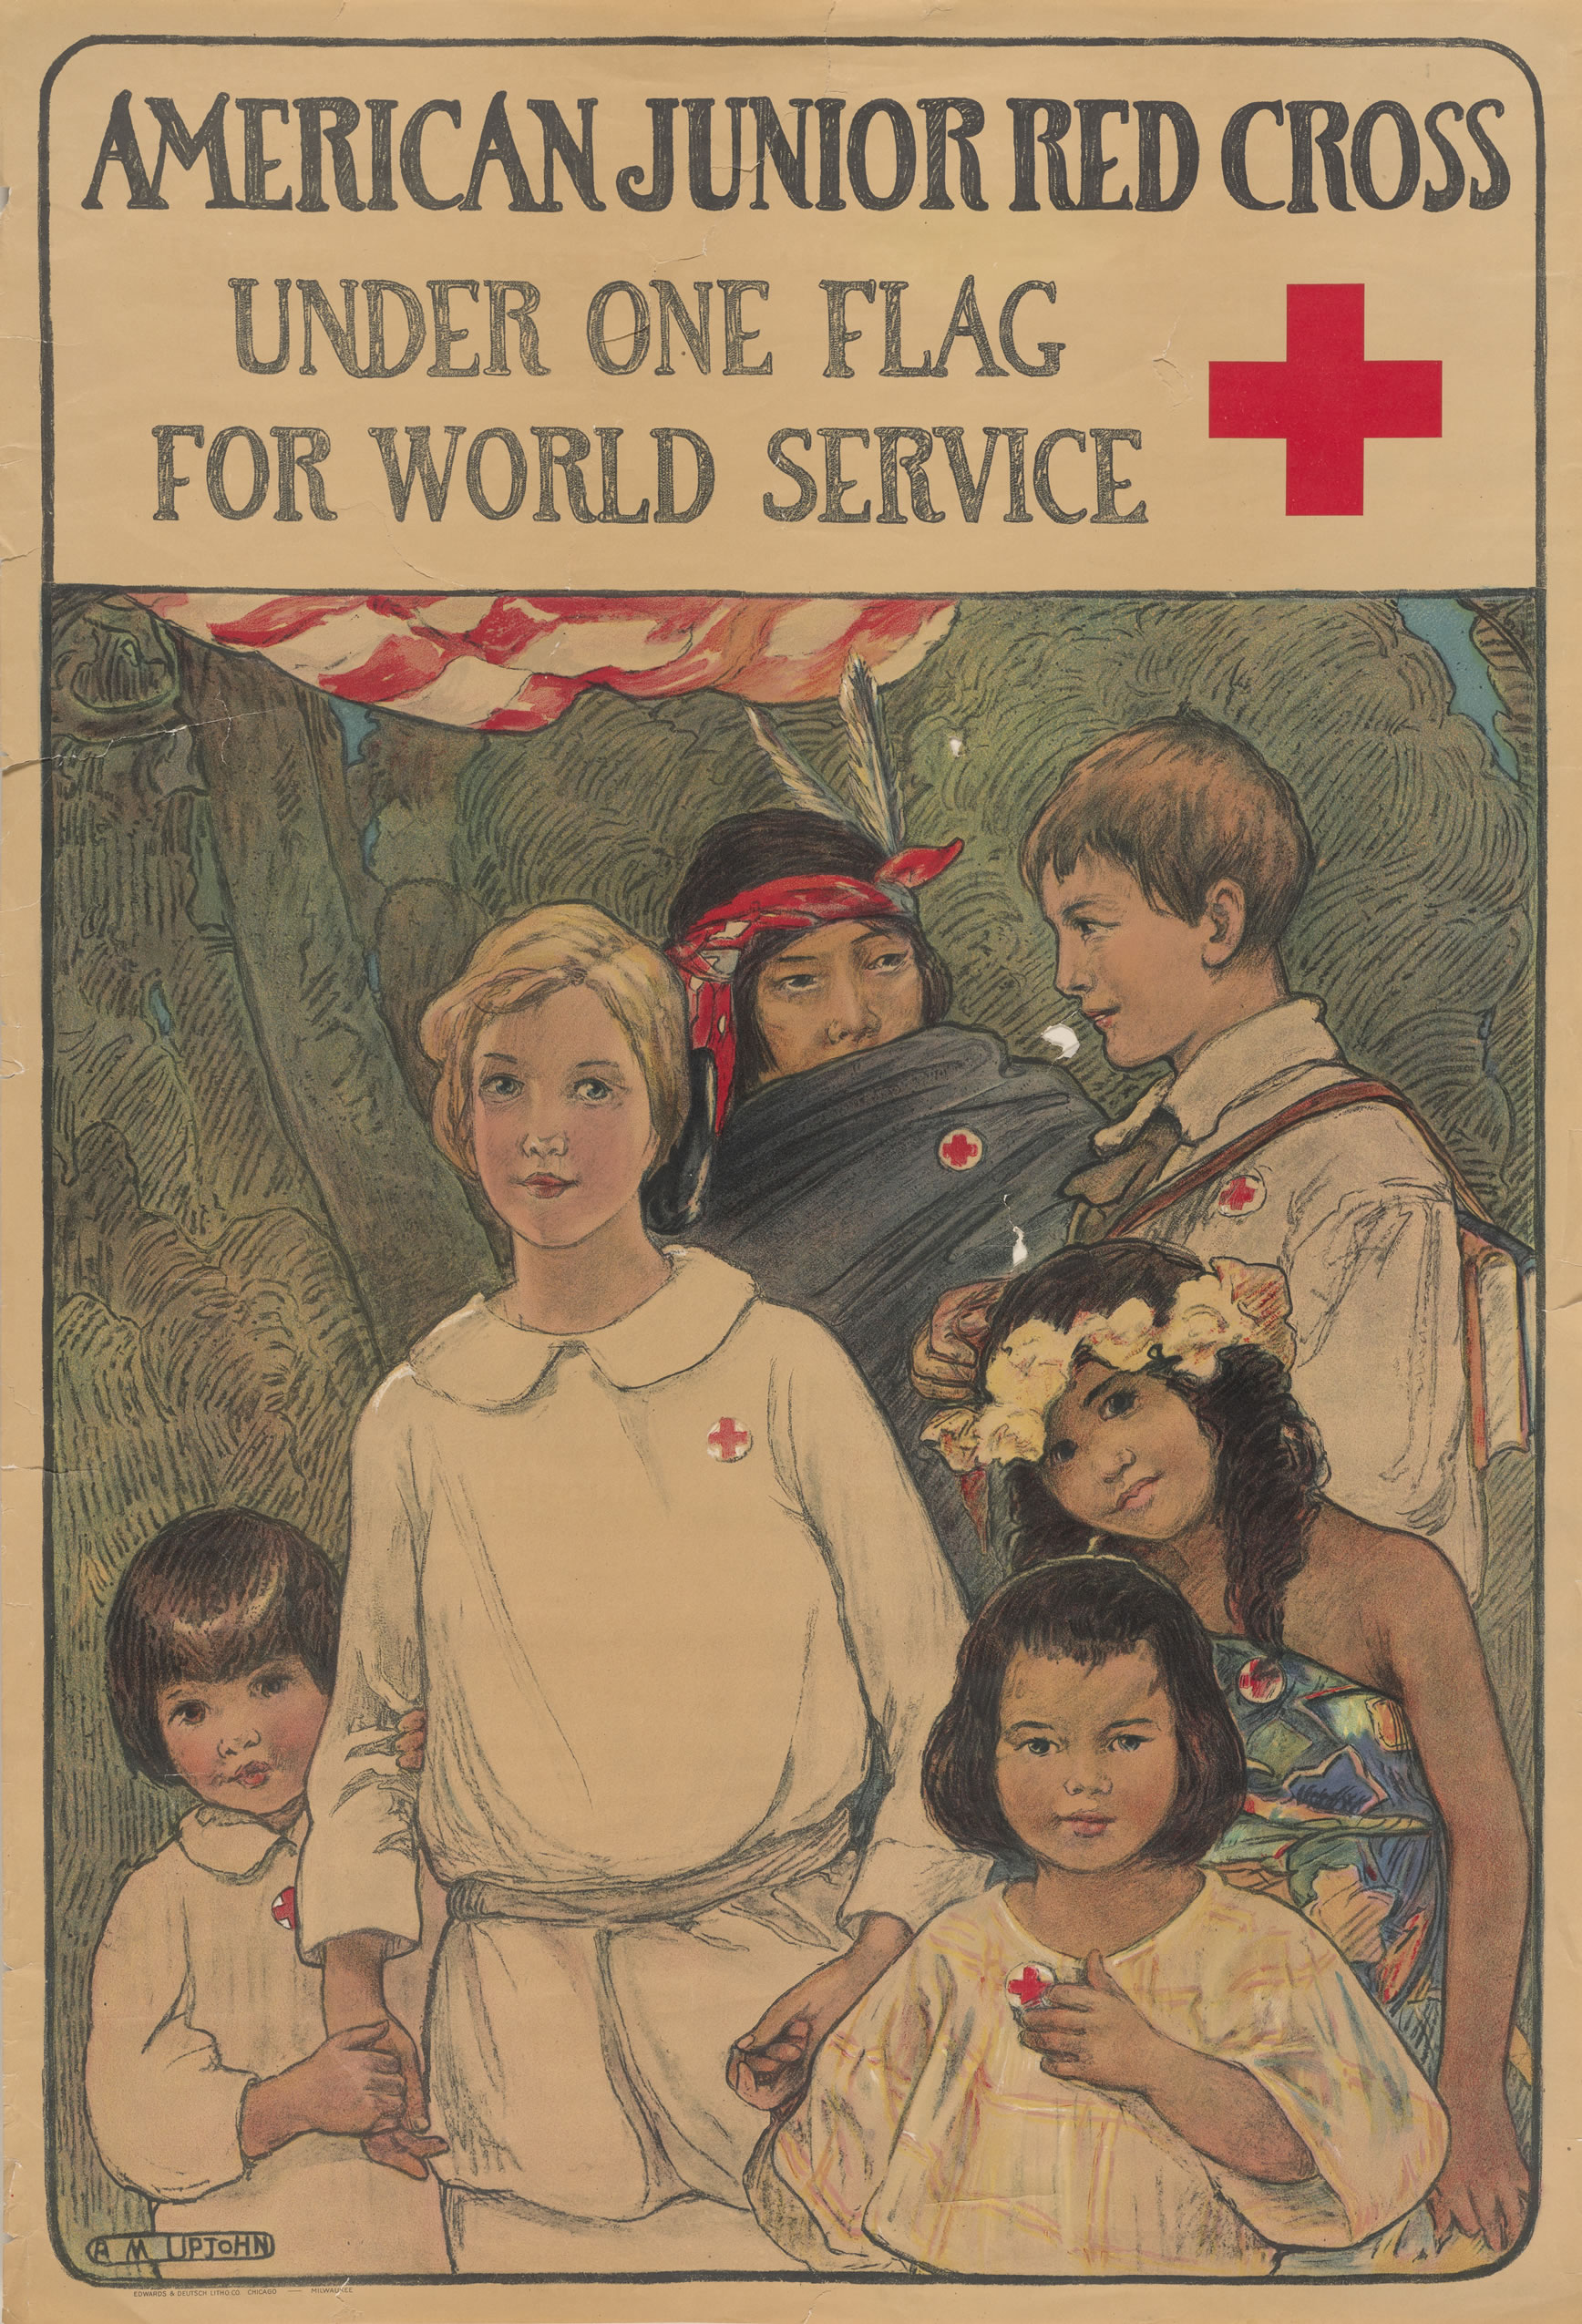 American Junior Red Cross, Under One Flag for World Service (Poster)